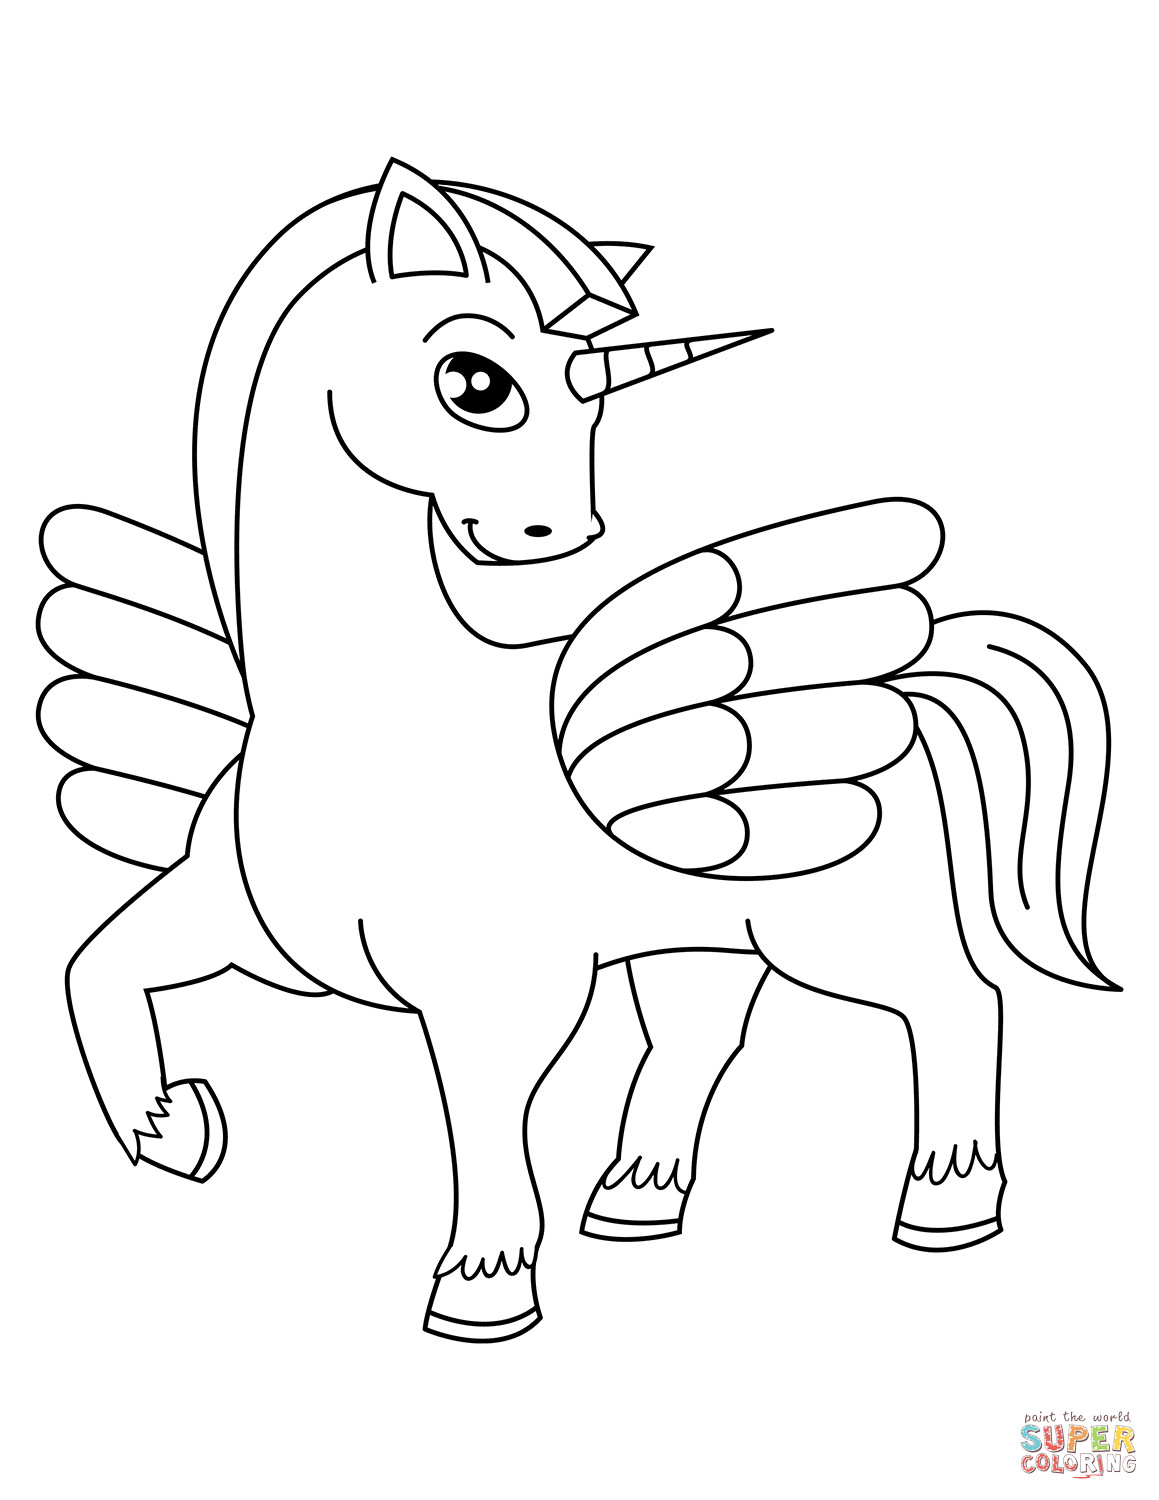 Cute Unicorn Coloring Pages For Kids
 Cute Winged Unicorn coloring page